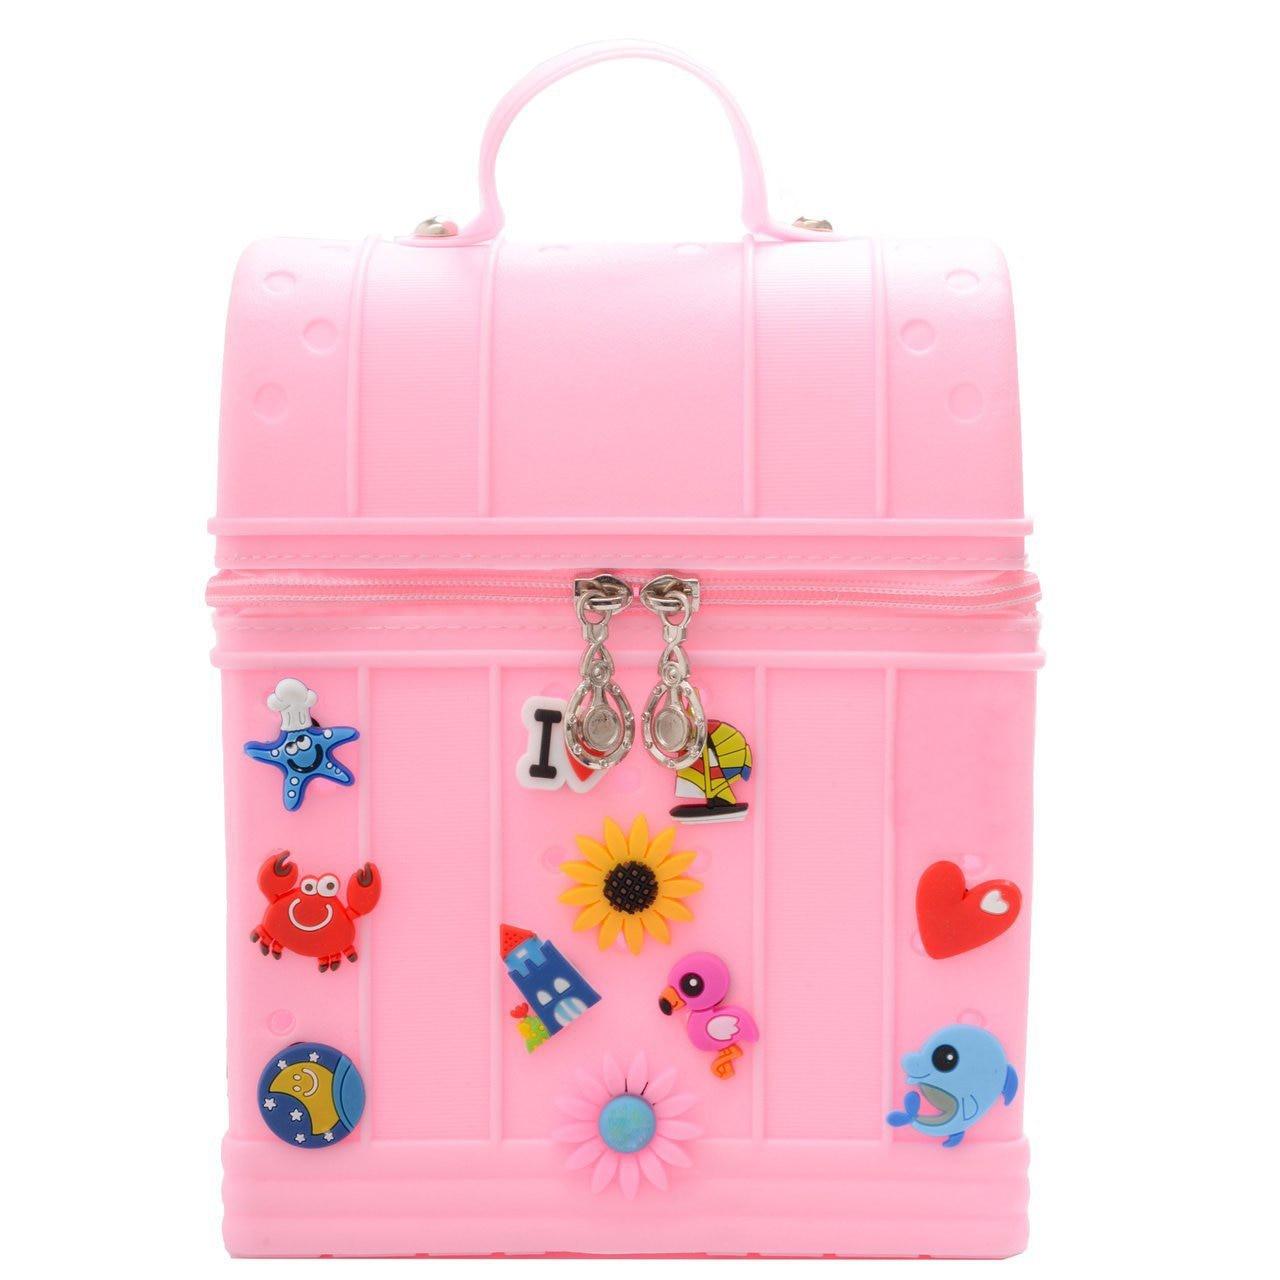 Carry-on Travel Cutie Bag - ODDSALTBoutique